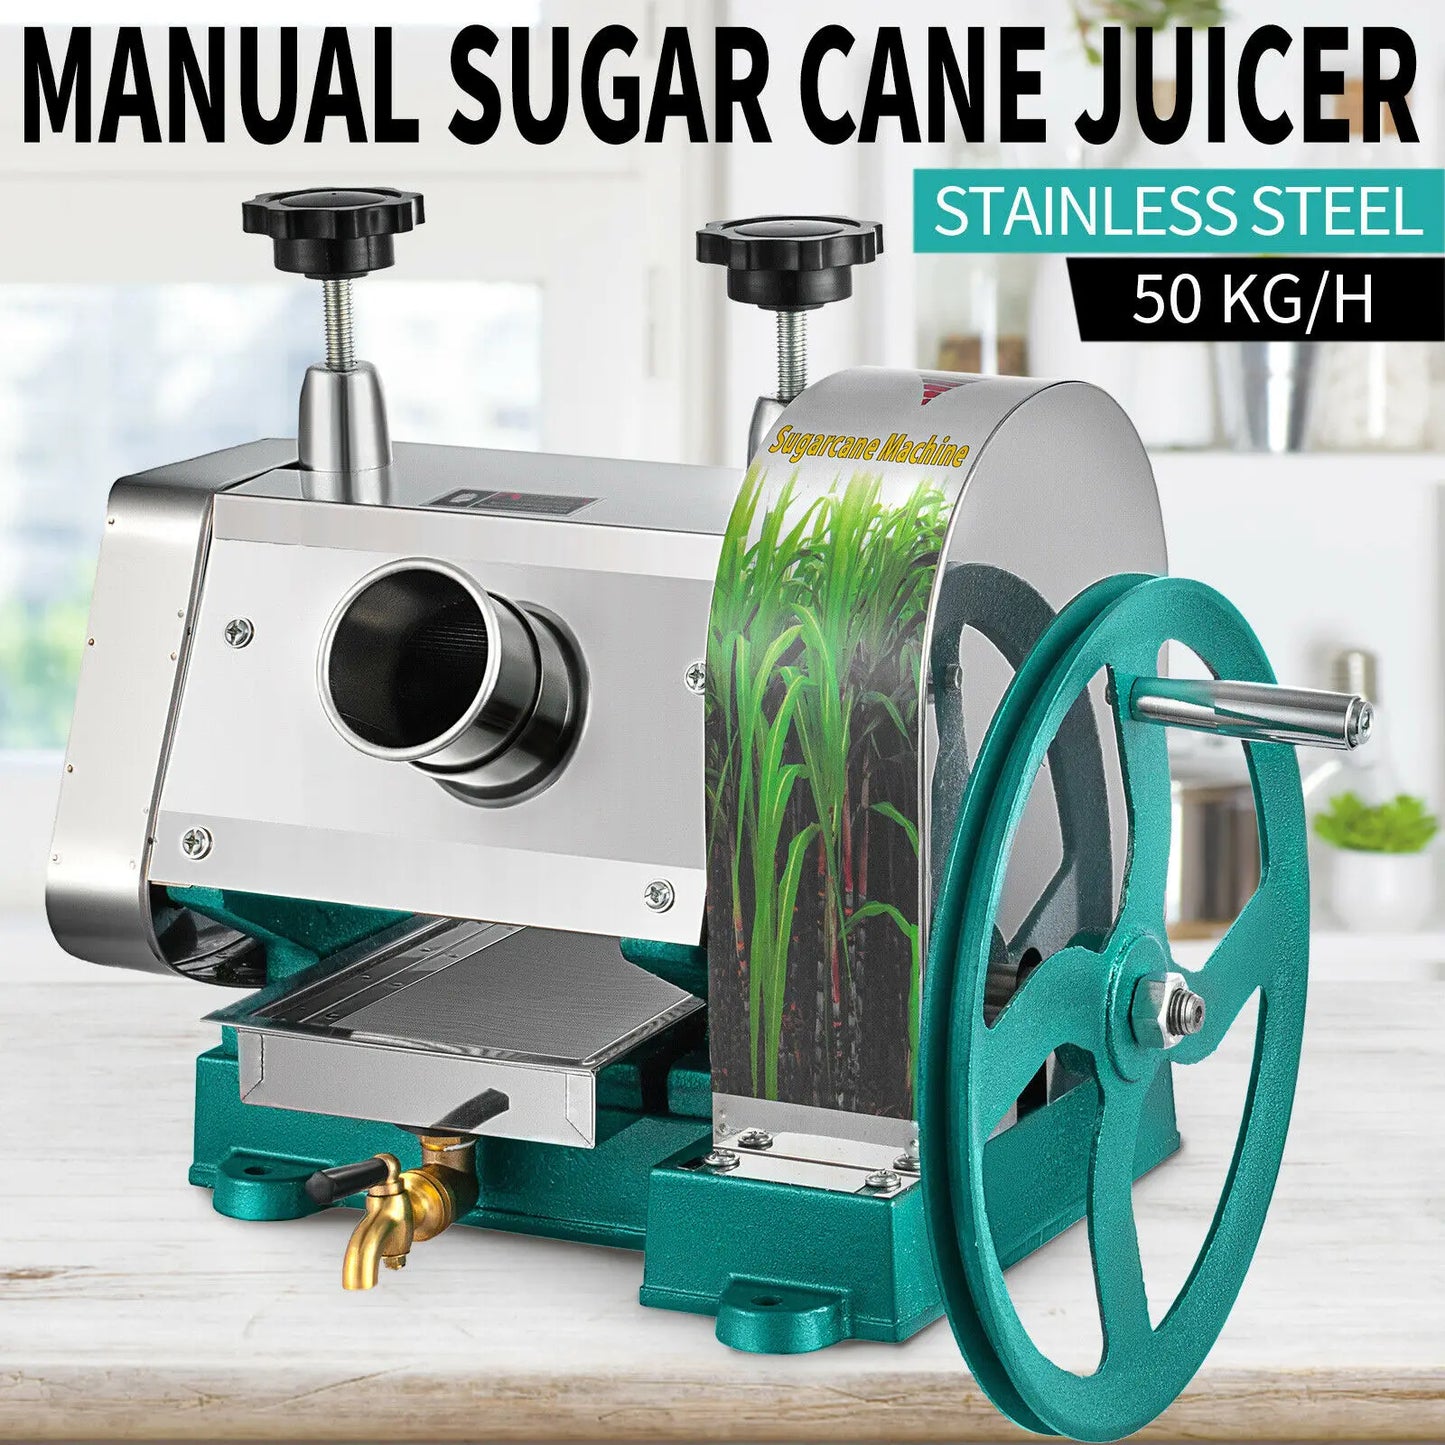 Manual Sugarcane Juicer, 50KG/H Capacity, Commercial Home Cane Juice Squeezer and Extractor